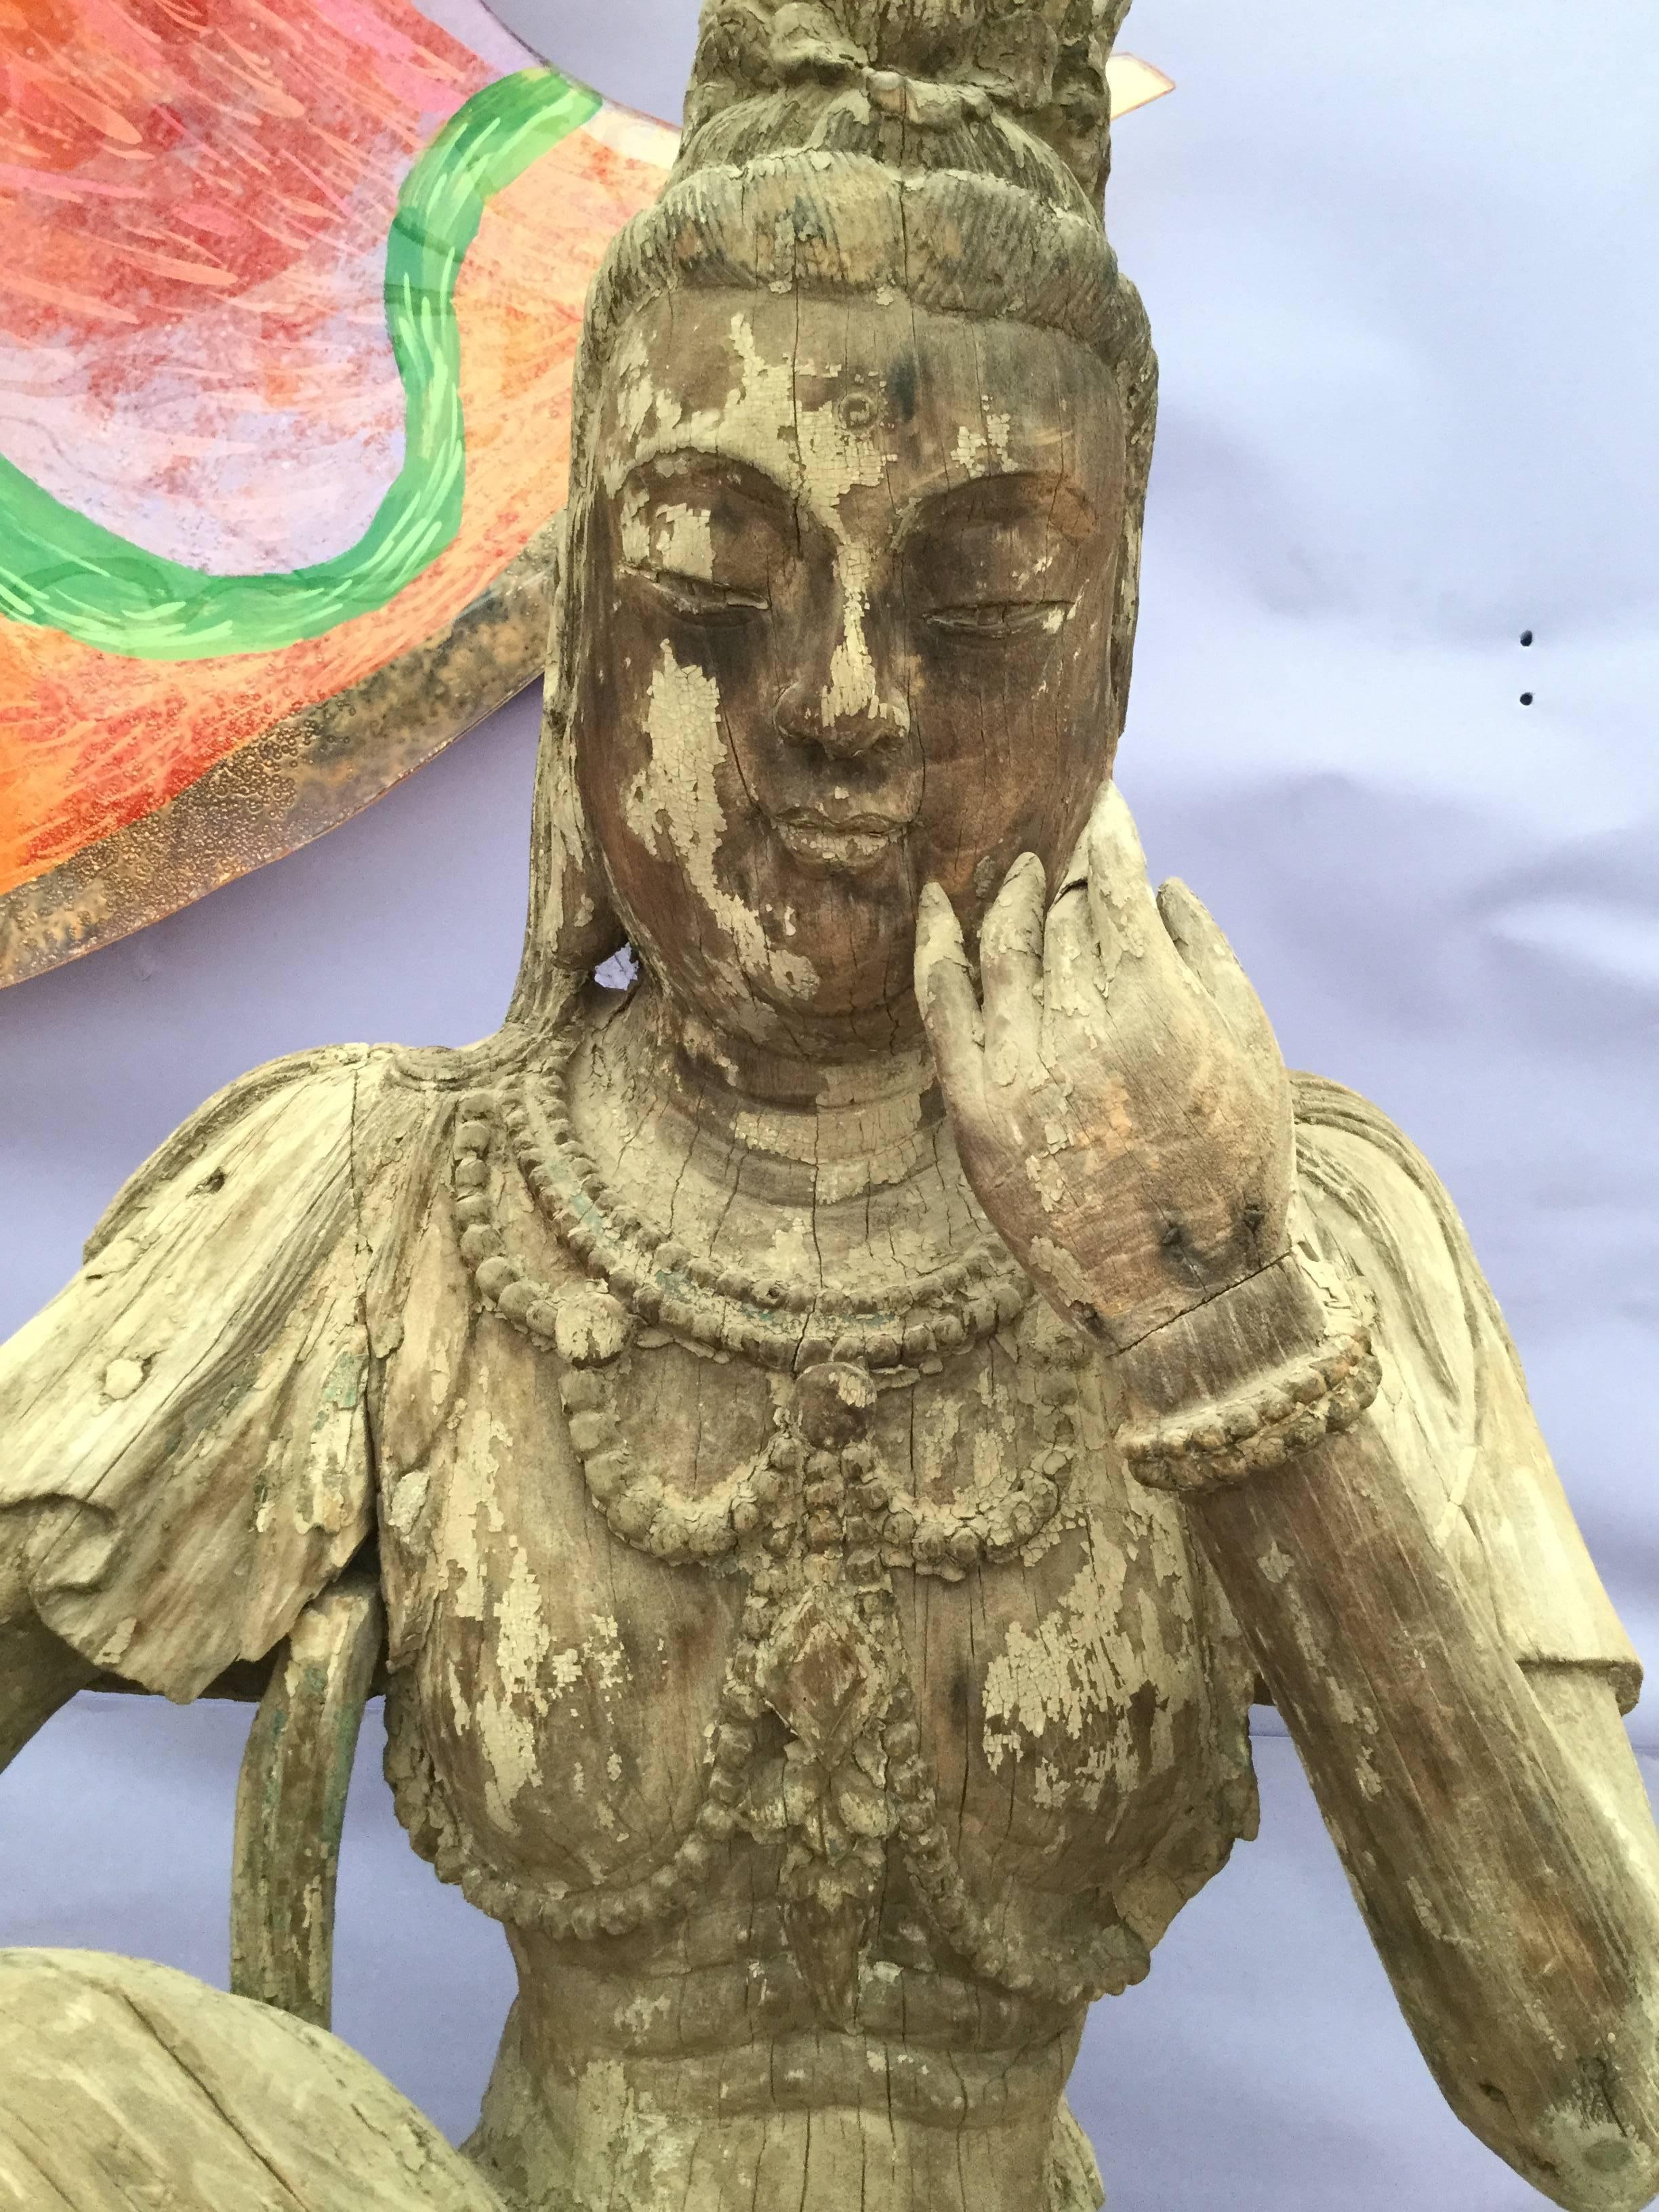 A beautiful Guan Yin carved wooden sculpture with a great worn and faded patina.
There are slight traces of color left but overall with faded patina. This Quan Yin is wearing an outstanding necklace and bracelets on each arm with hair twisted into